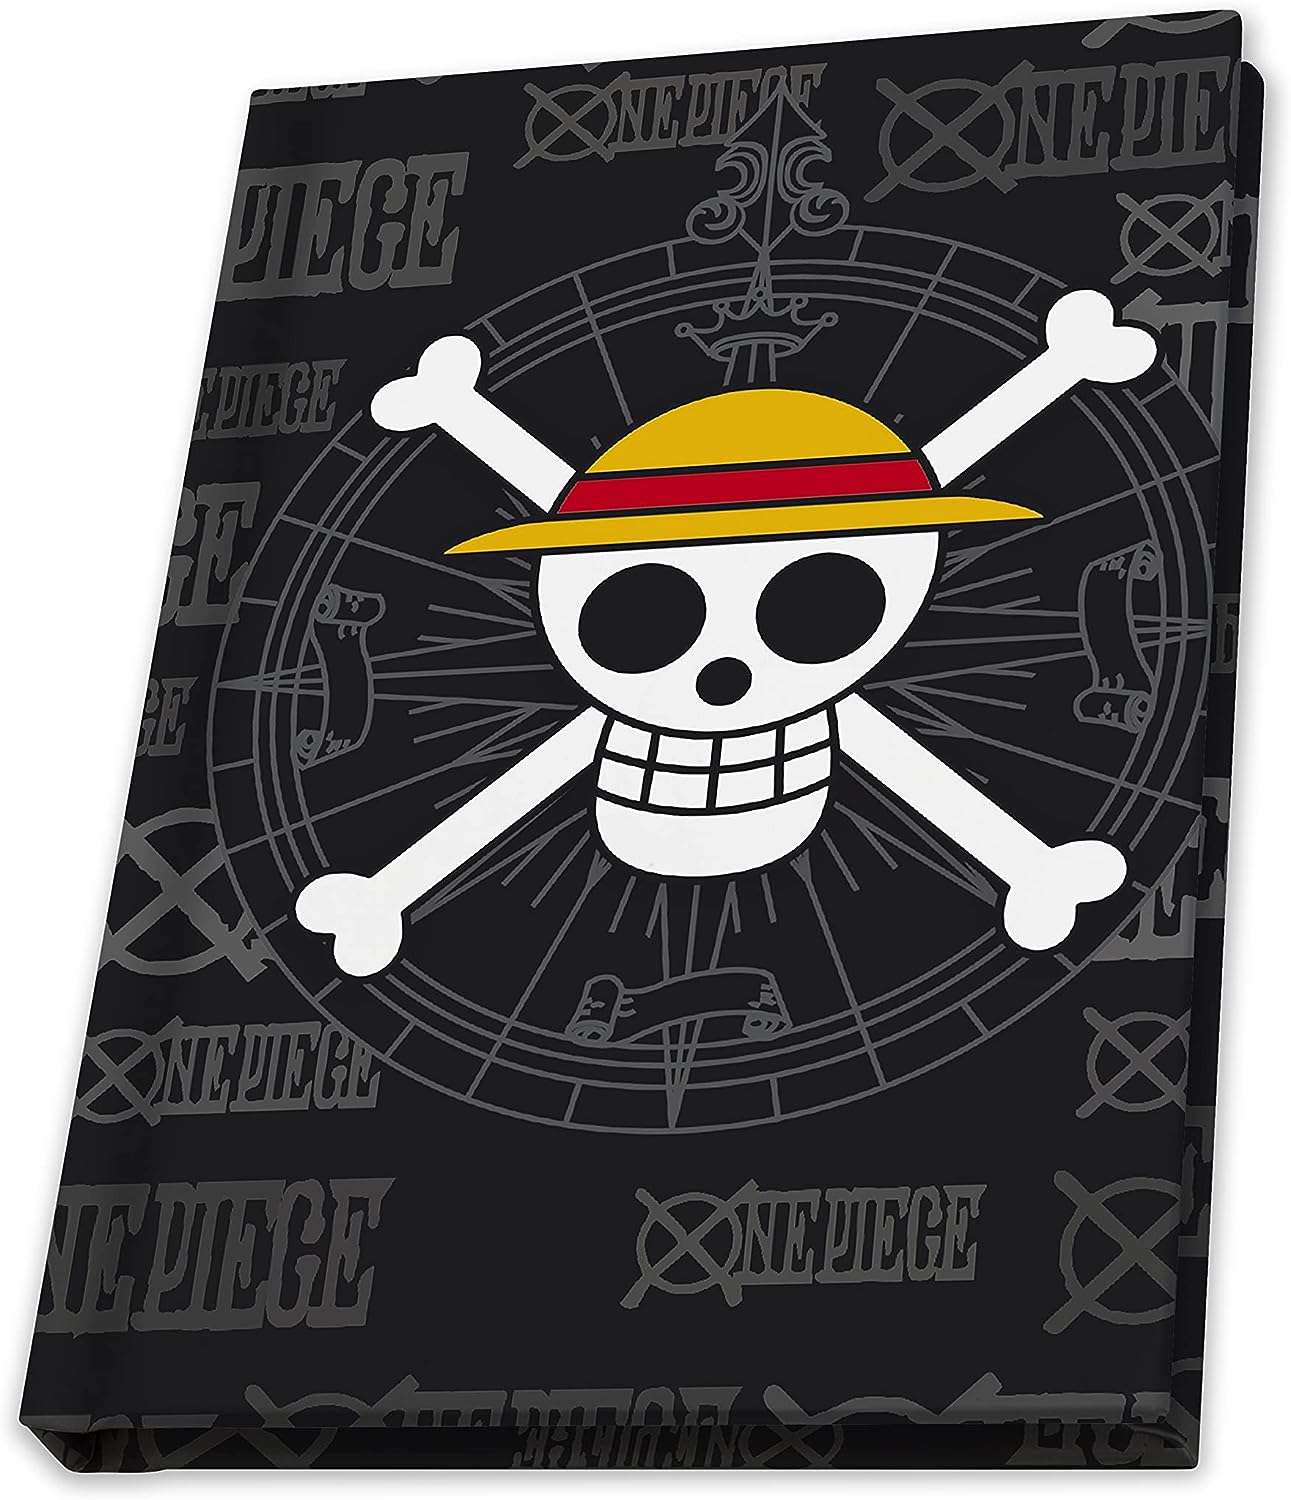 One Piece Straw Hat Jolly Roger Crew Mug Notepad Pin Gift Set - Abysse - 3